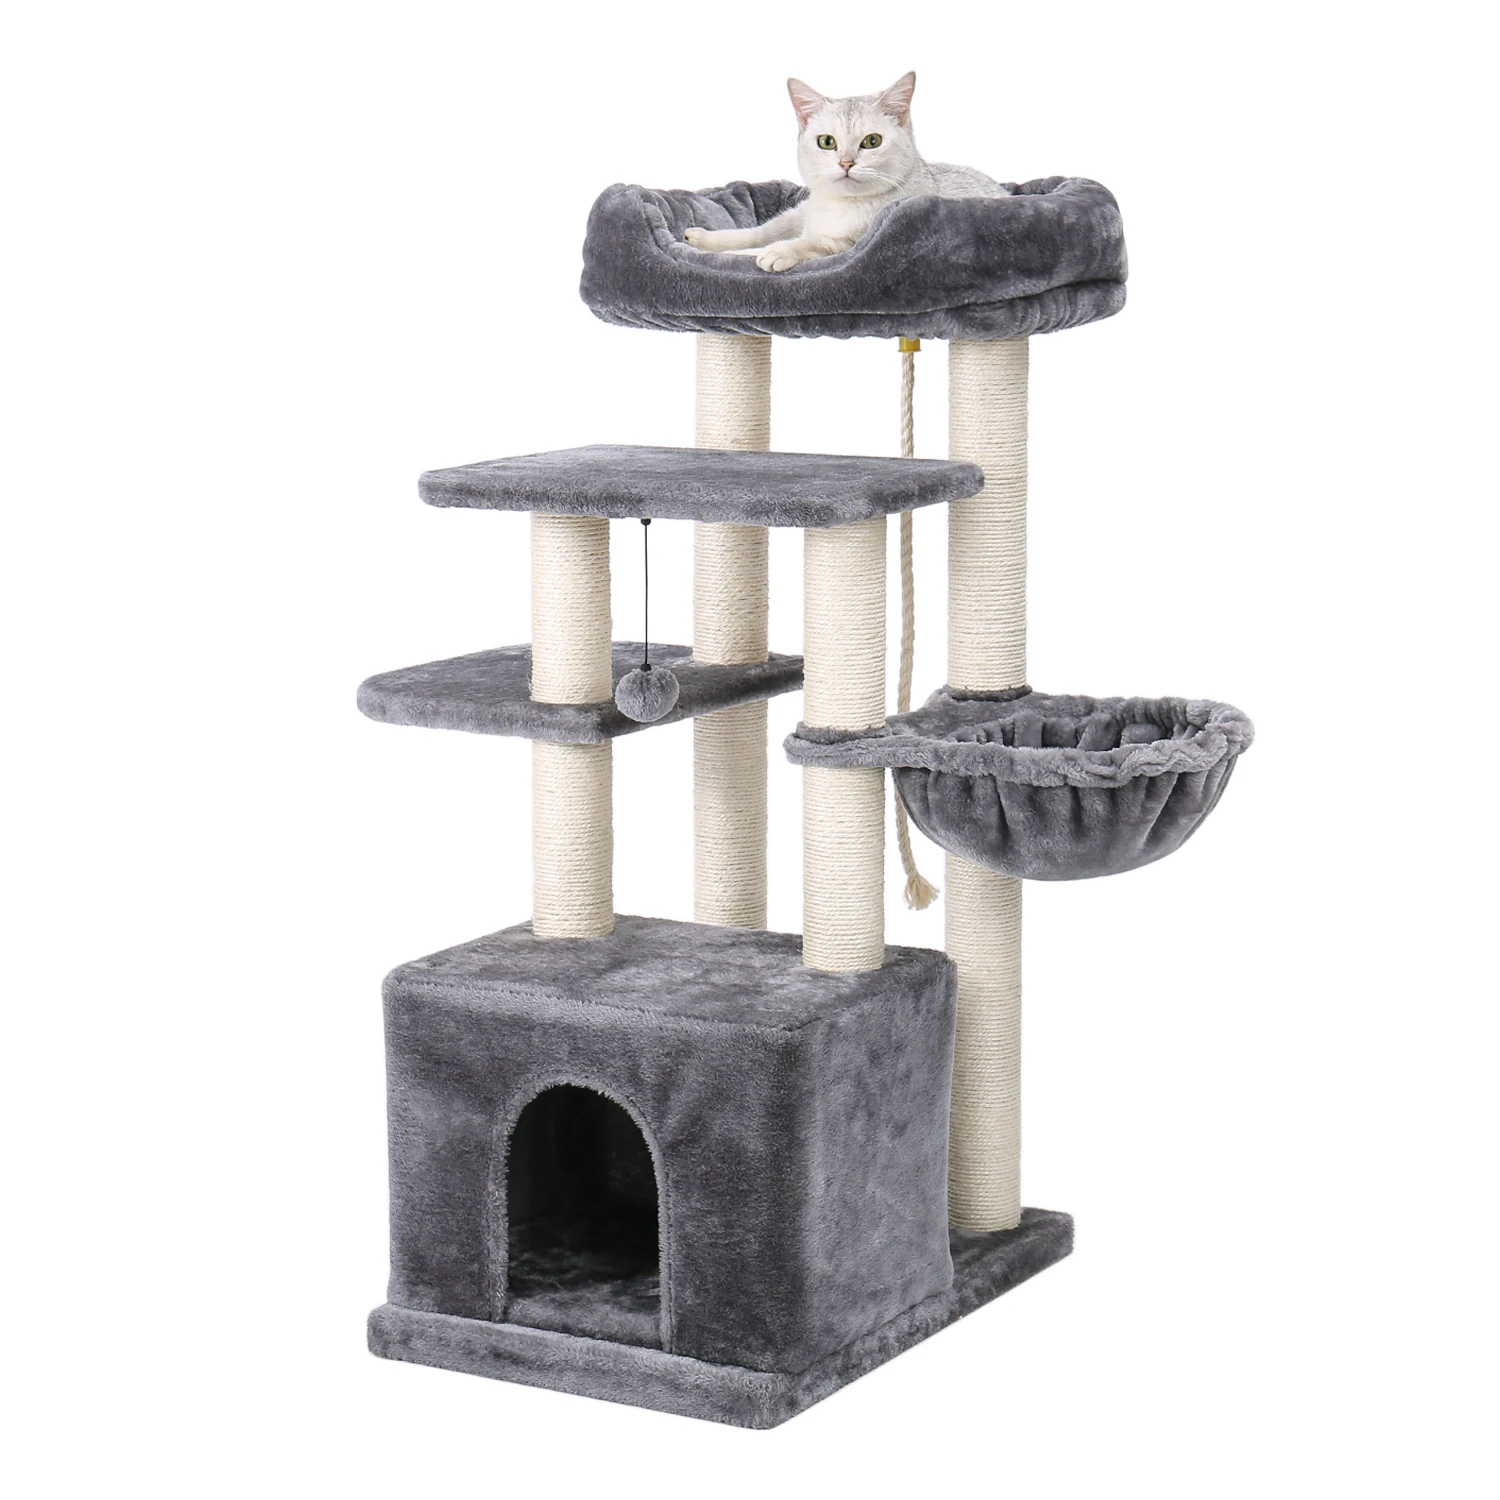 US Fast Delivery Cat Tree Condo Natural Sisal Scratching Post for Kitten Pet Cat Tower Cozy Perch Specious Hummock Dangling Ball